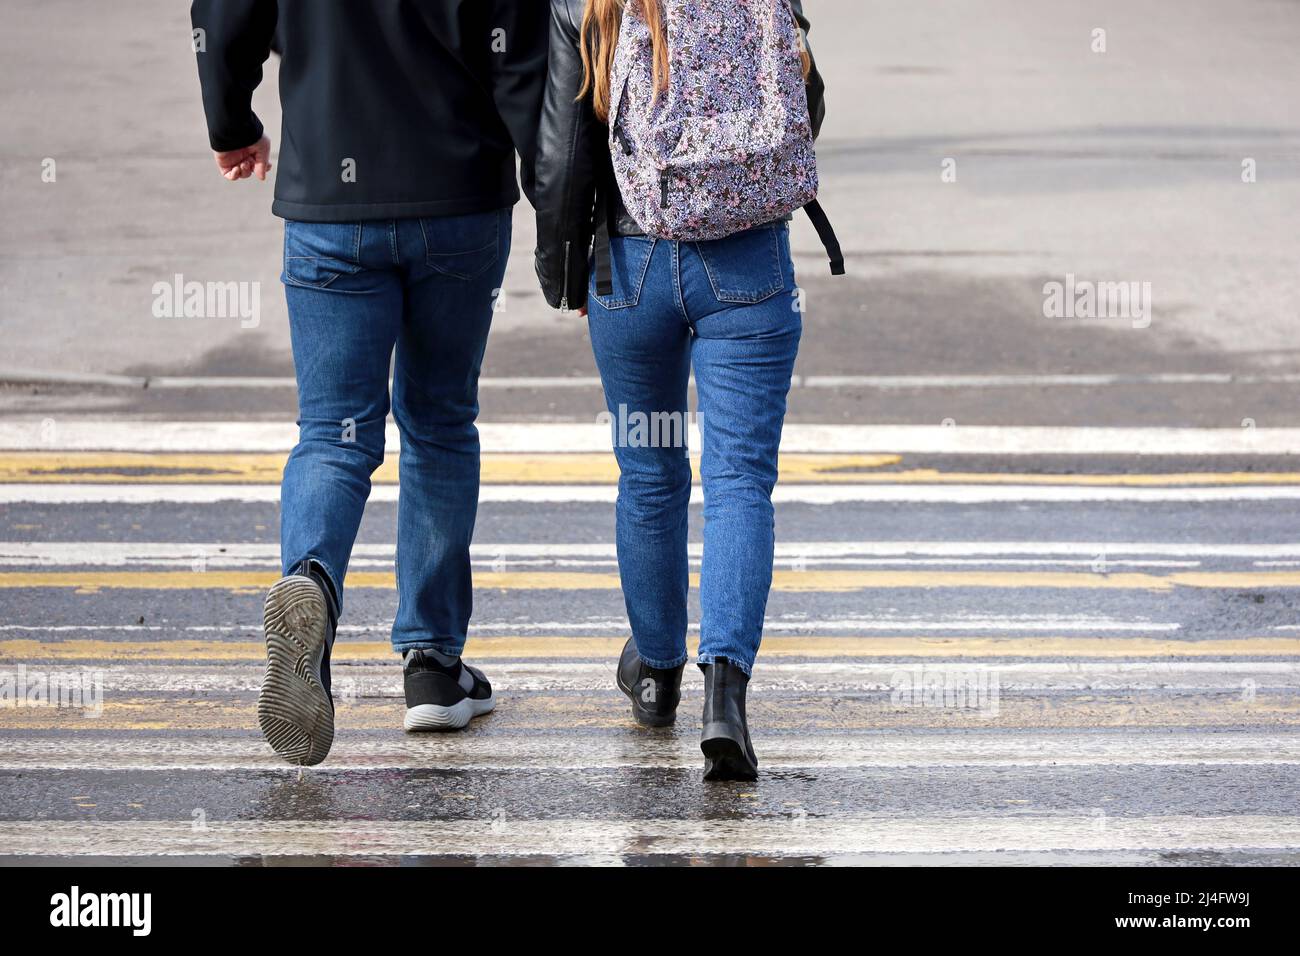 Couple in jeans walks on pedestrian crossing holding hands. Road zebra marking, people on wet crosswalk in spring weather, street safety concept Stock Photo